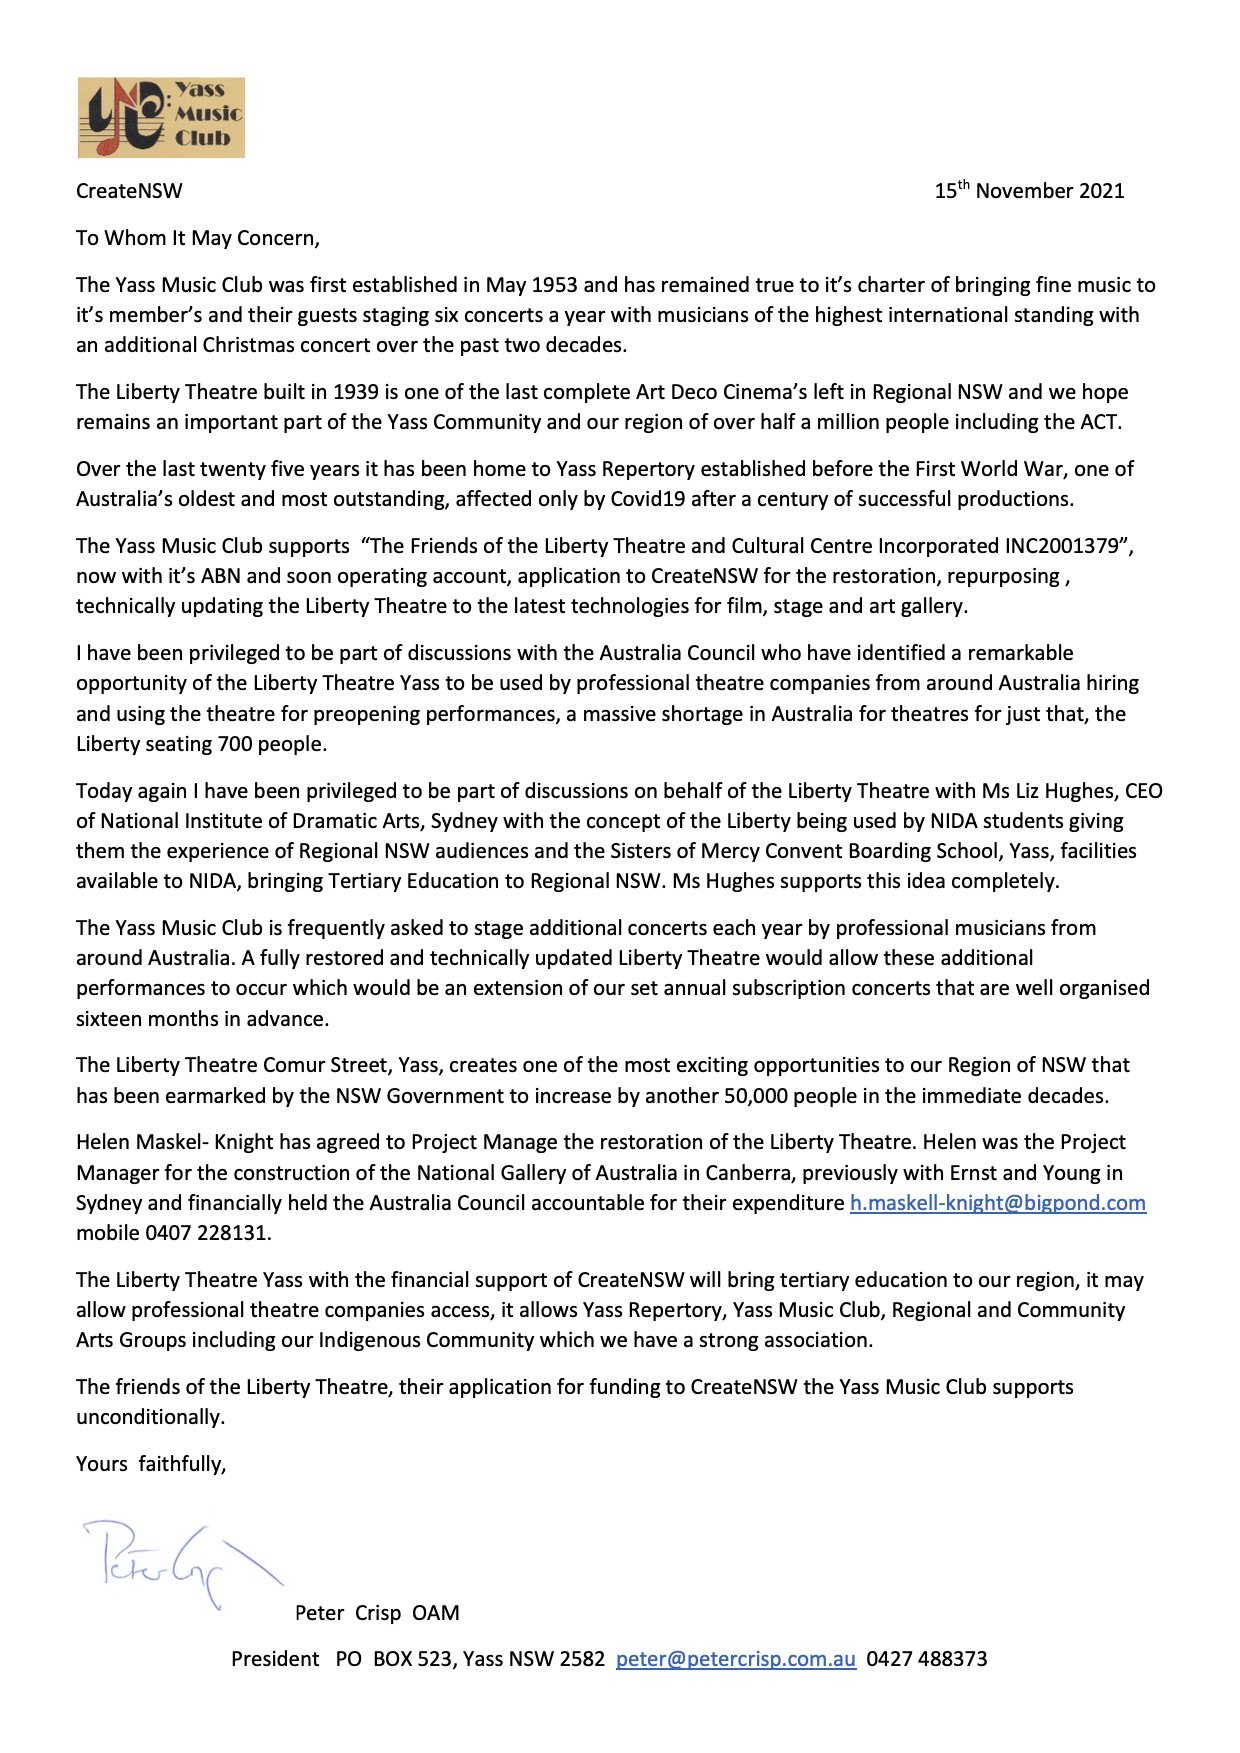 The Yass Music Club's letter of  support of the Friends of the Liberty Theatre application to CreateNSW for funding 15th November 2021[92].jpg